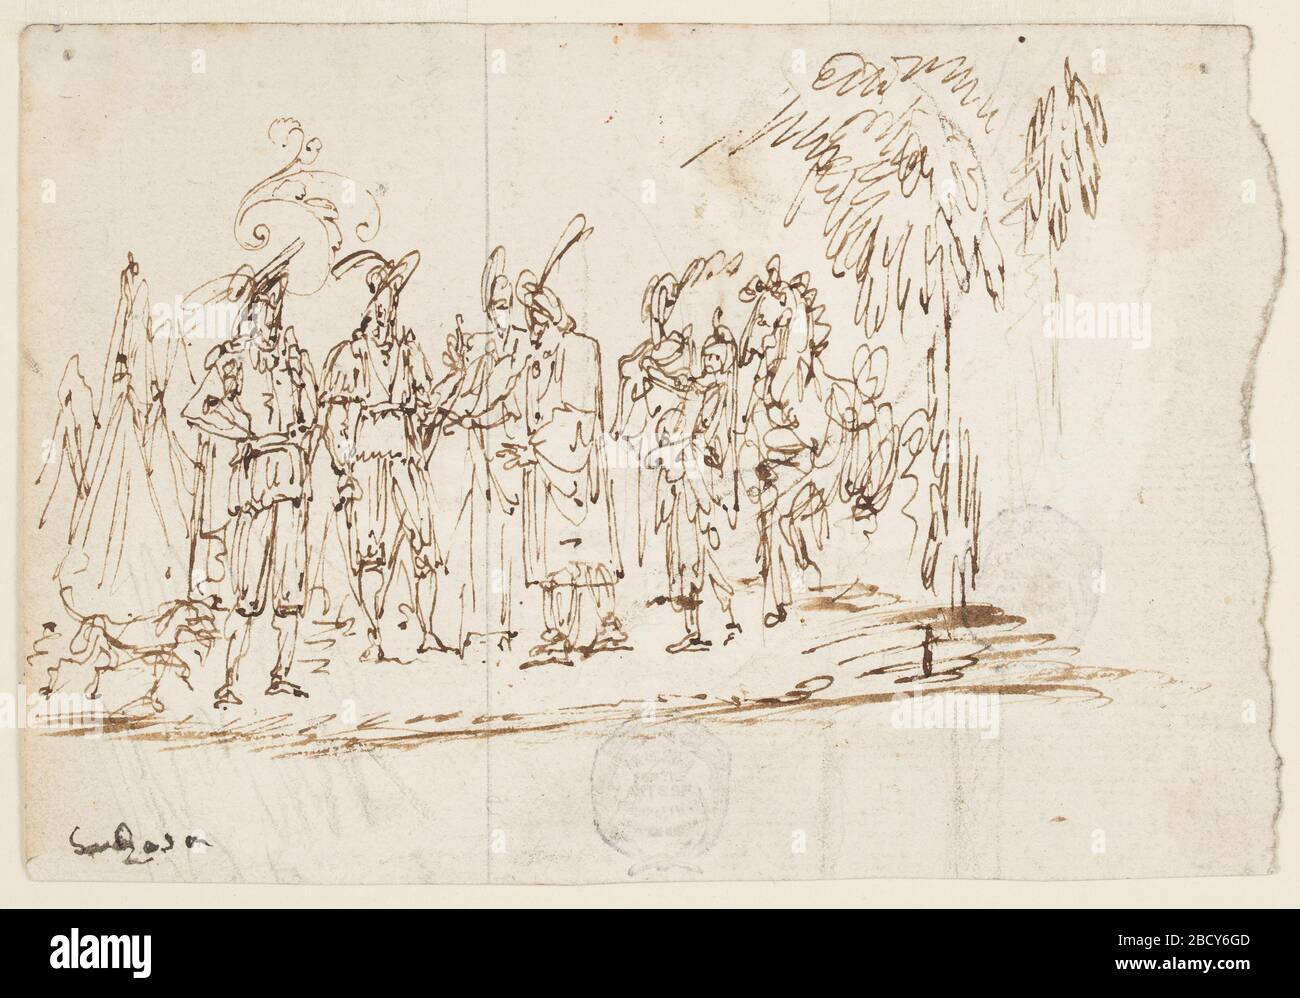 Sketch An Oriental Visit. Research in ProgressHorizontal composition with a man in a turban followed by two women, and a servant carrying something, approaching two European warriors in their camp. Sketch An Oriental Visit Stock Photo